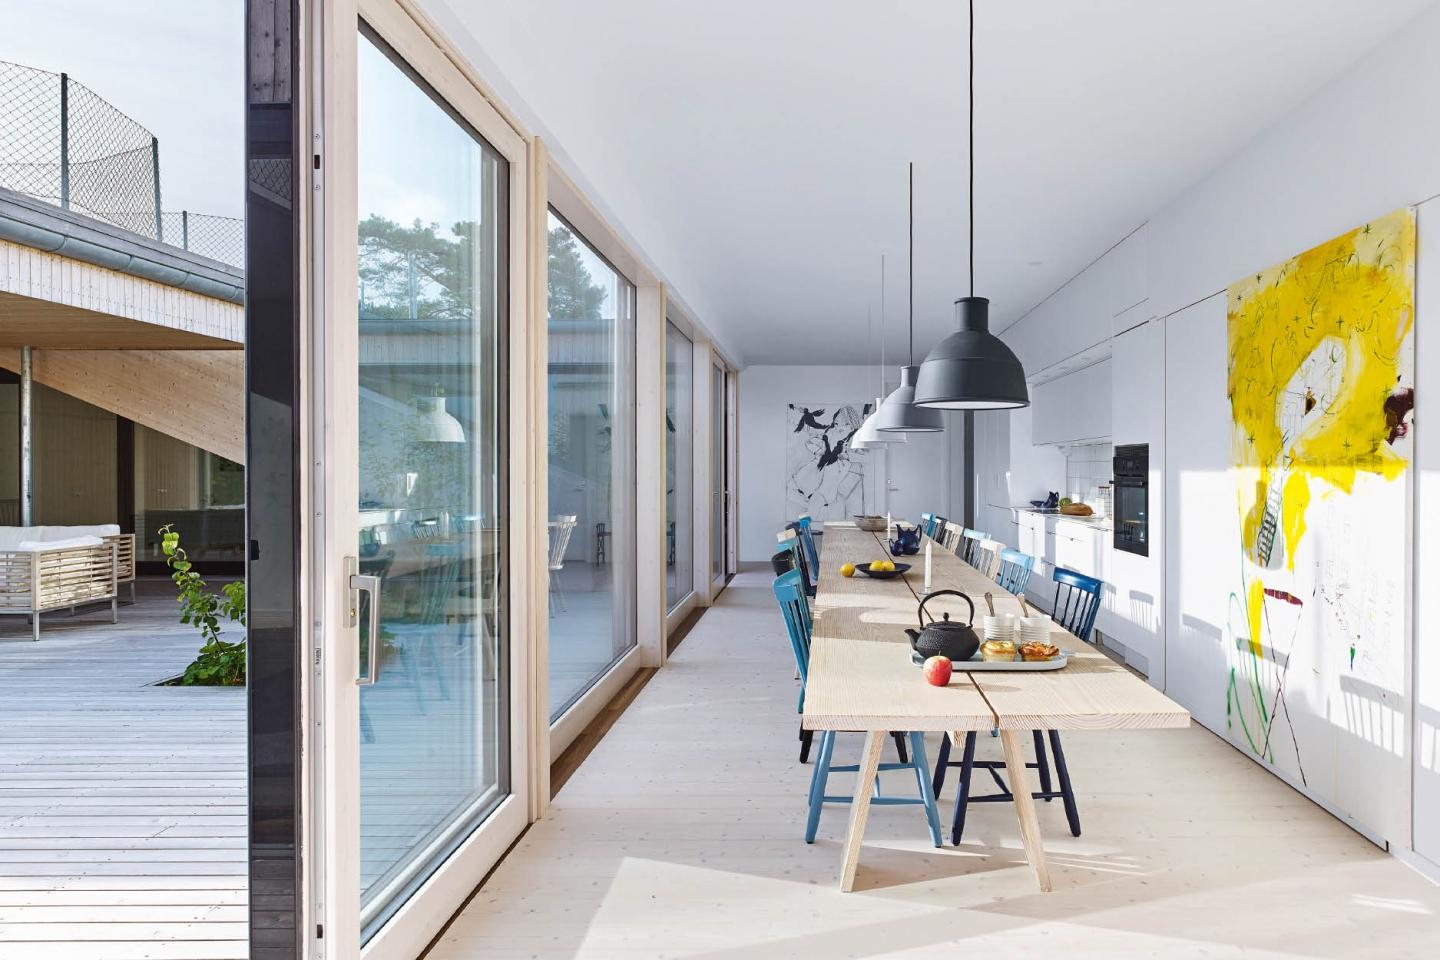 An impressive dining table based on a traditional trestle design runs the length of the open-plan kitchen and dining  area, seating up to 26 people